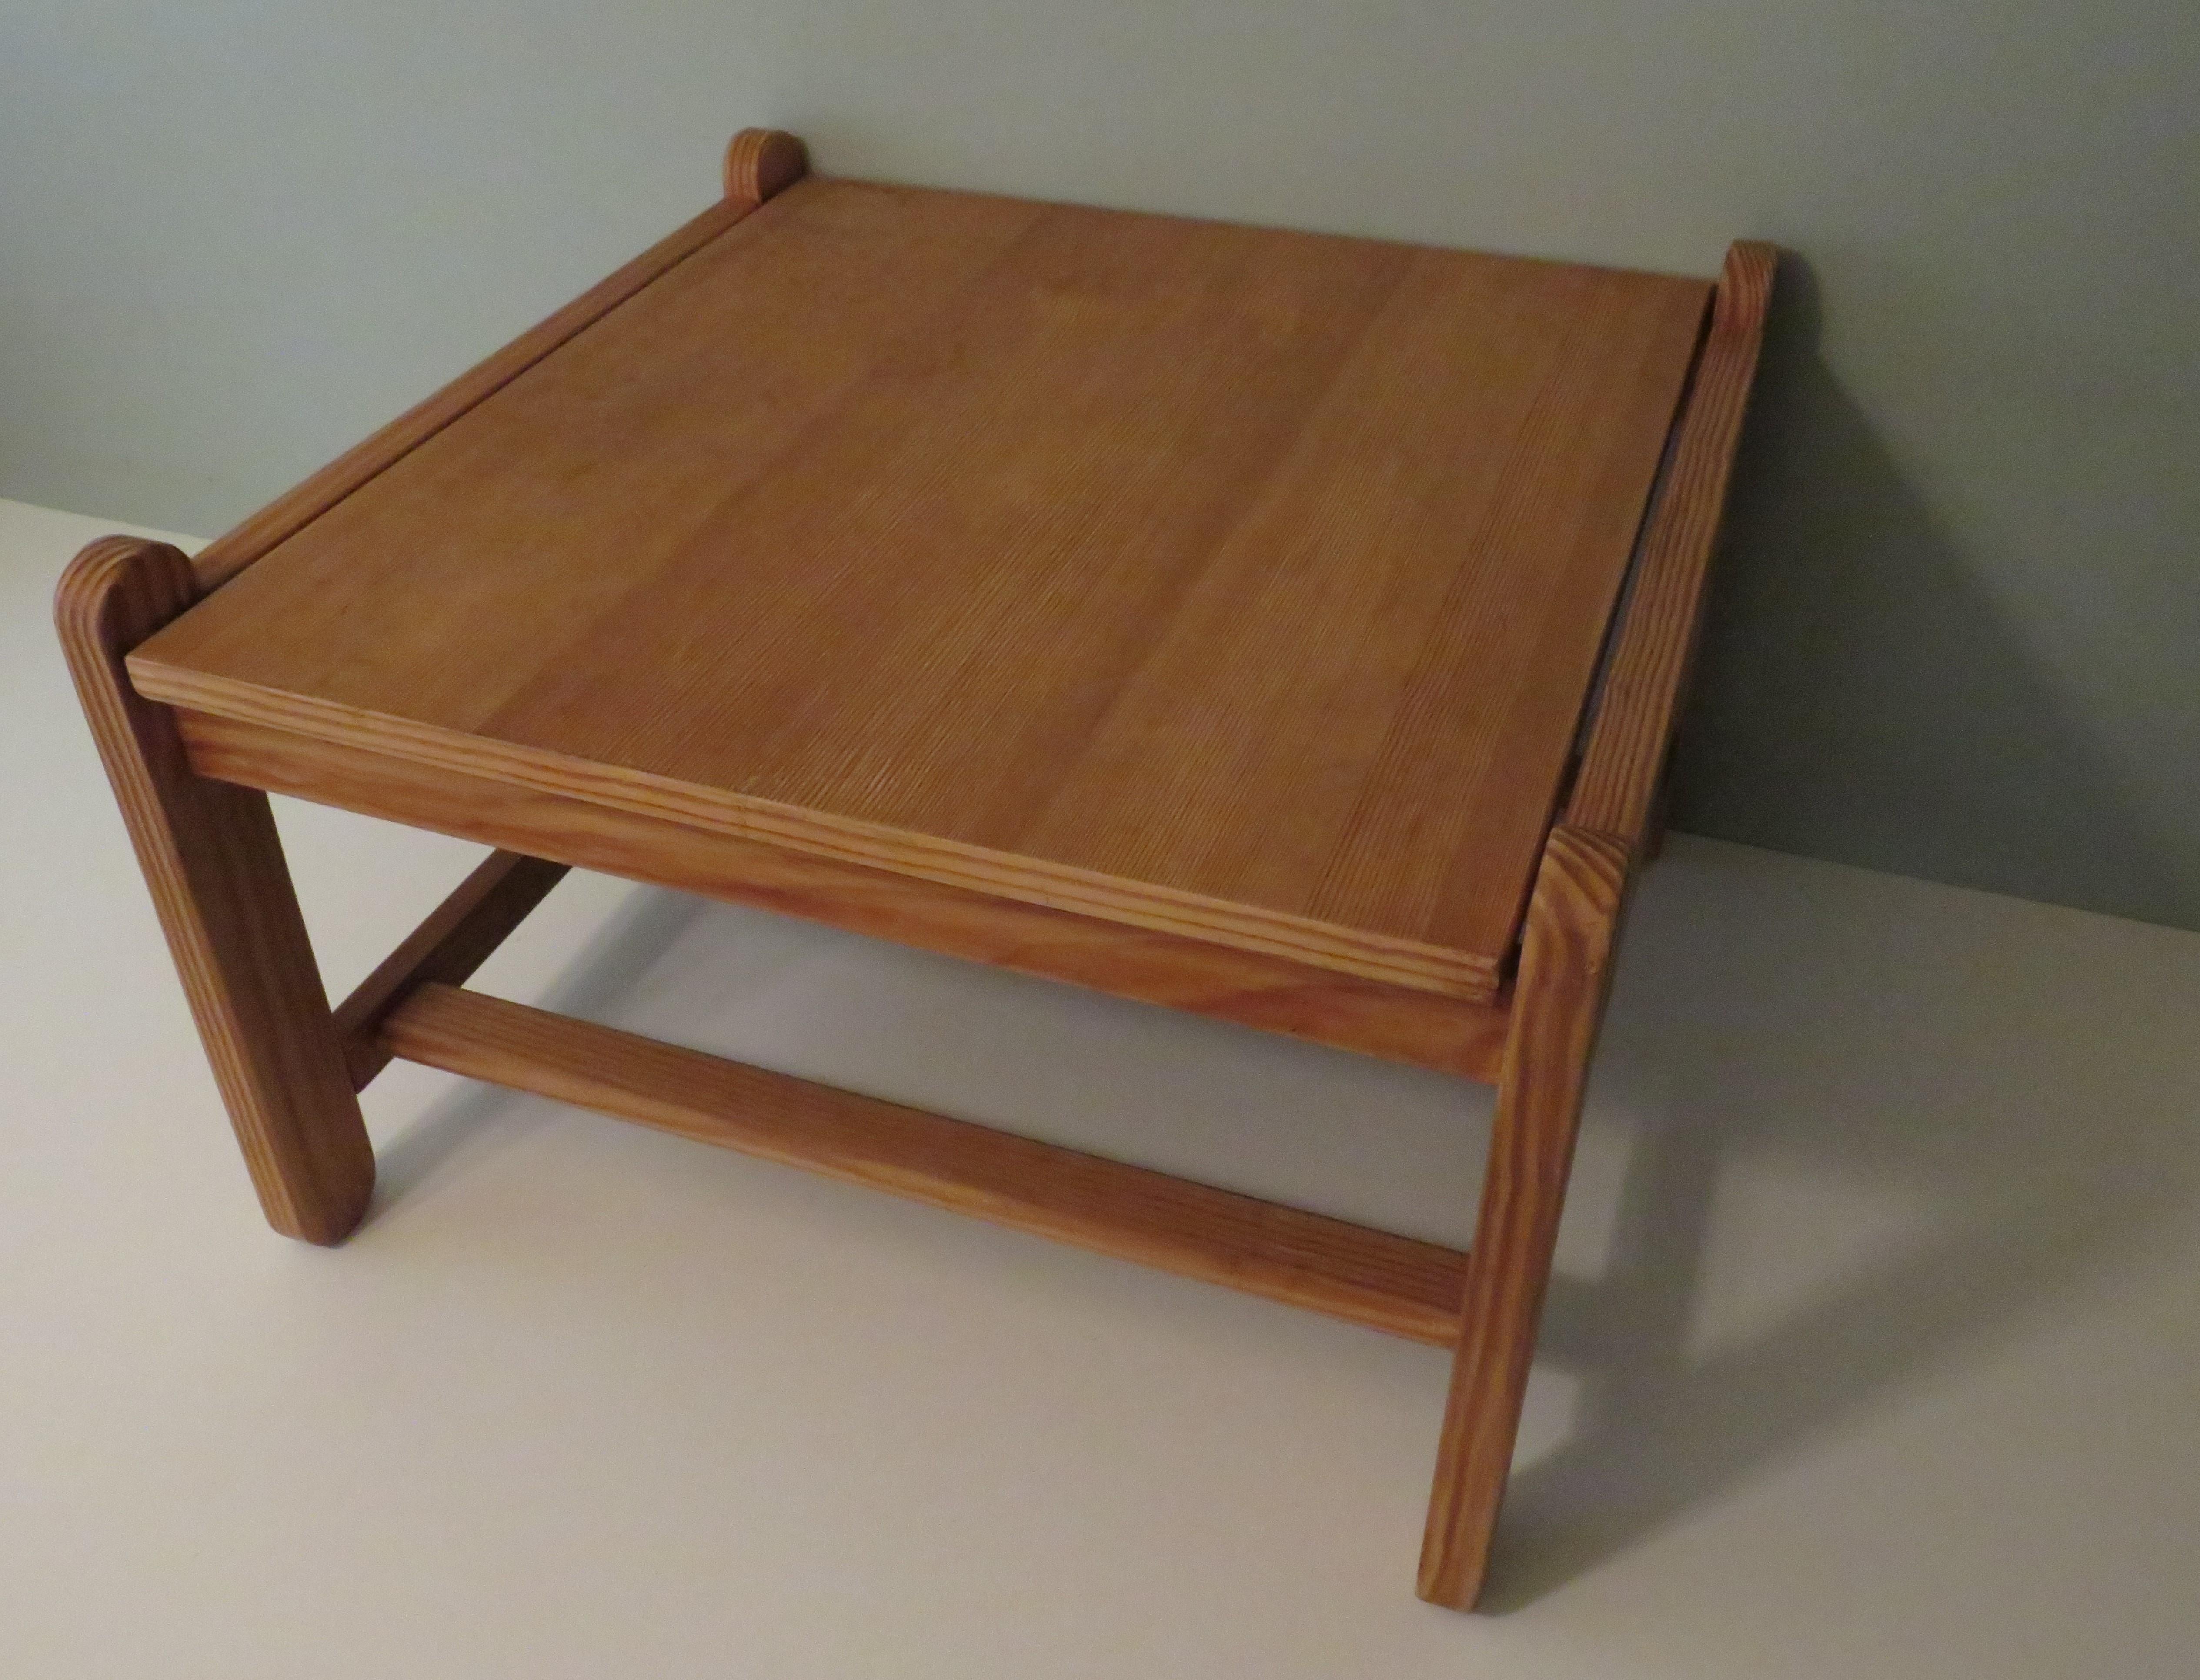 Niels Eilersen Coffee Table, Denmark, 1970 In Good Condition For Sale In Herentals, BE